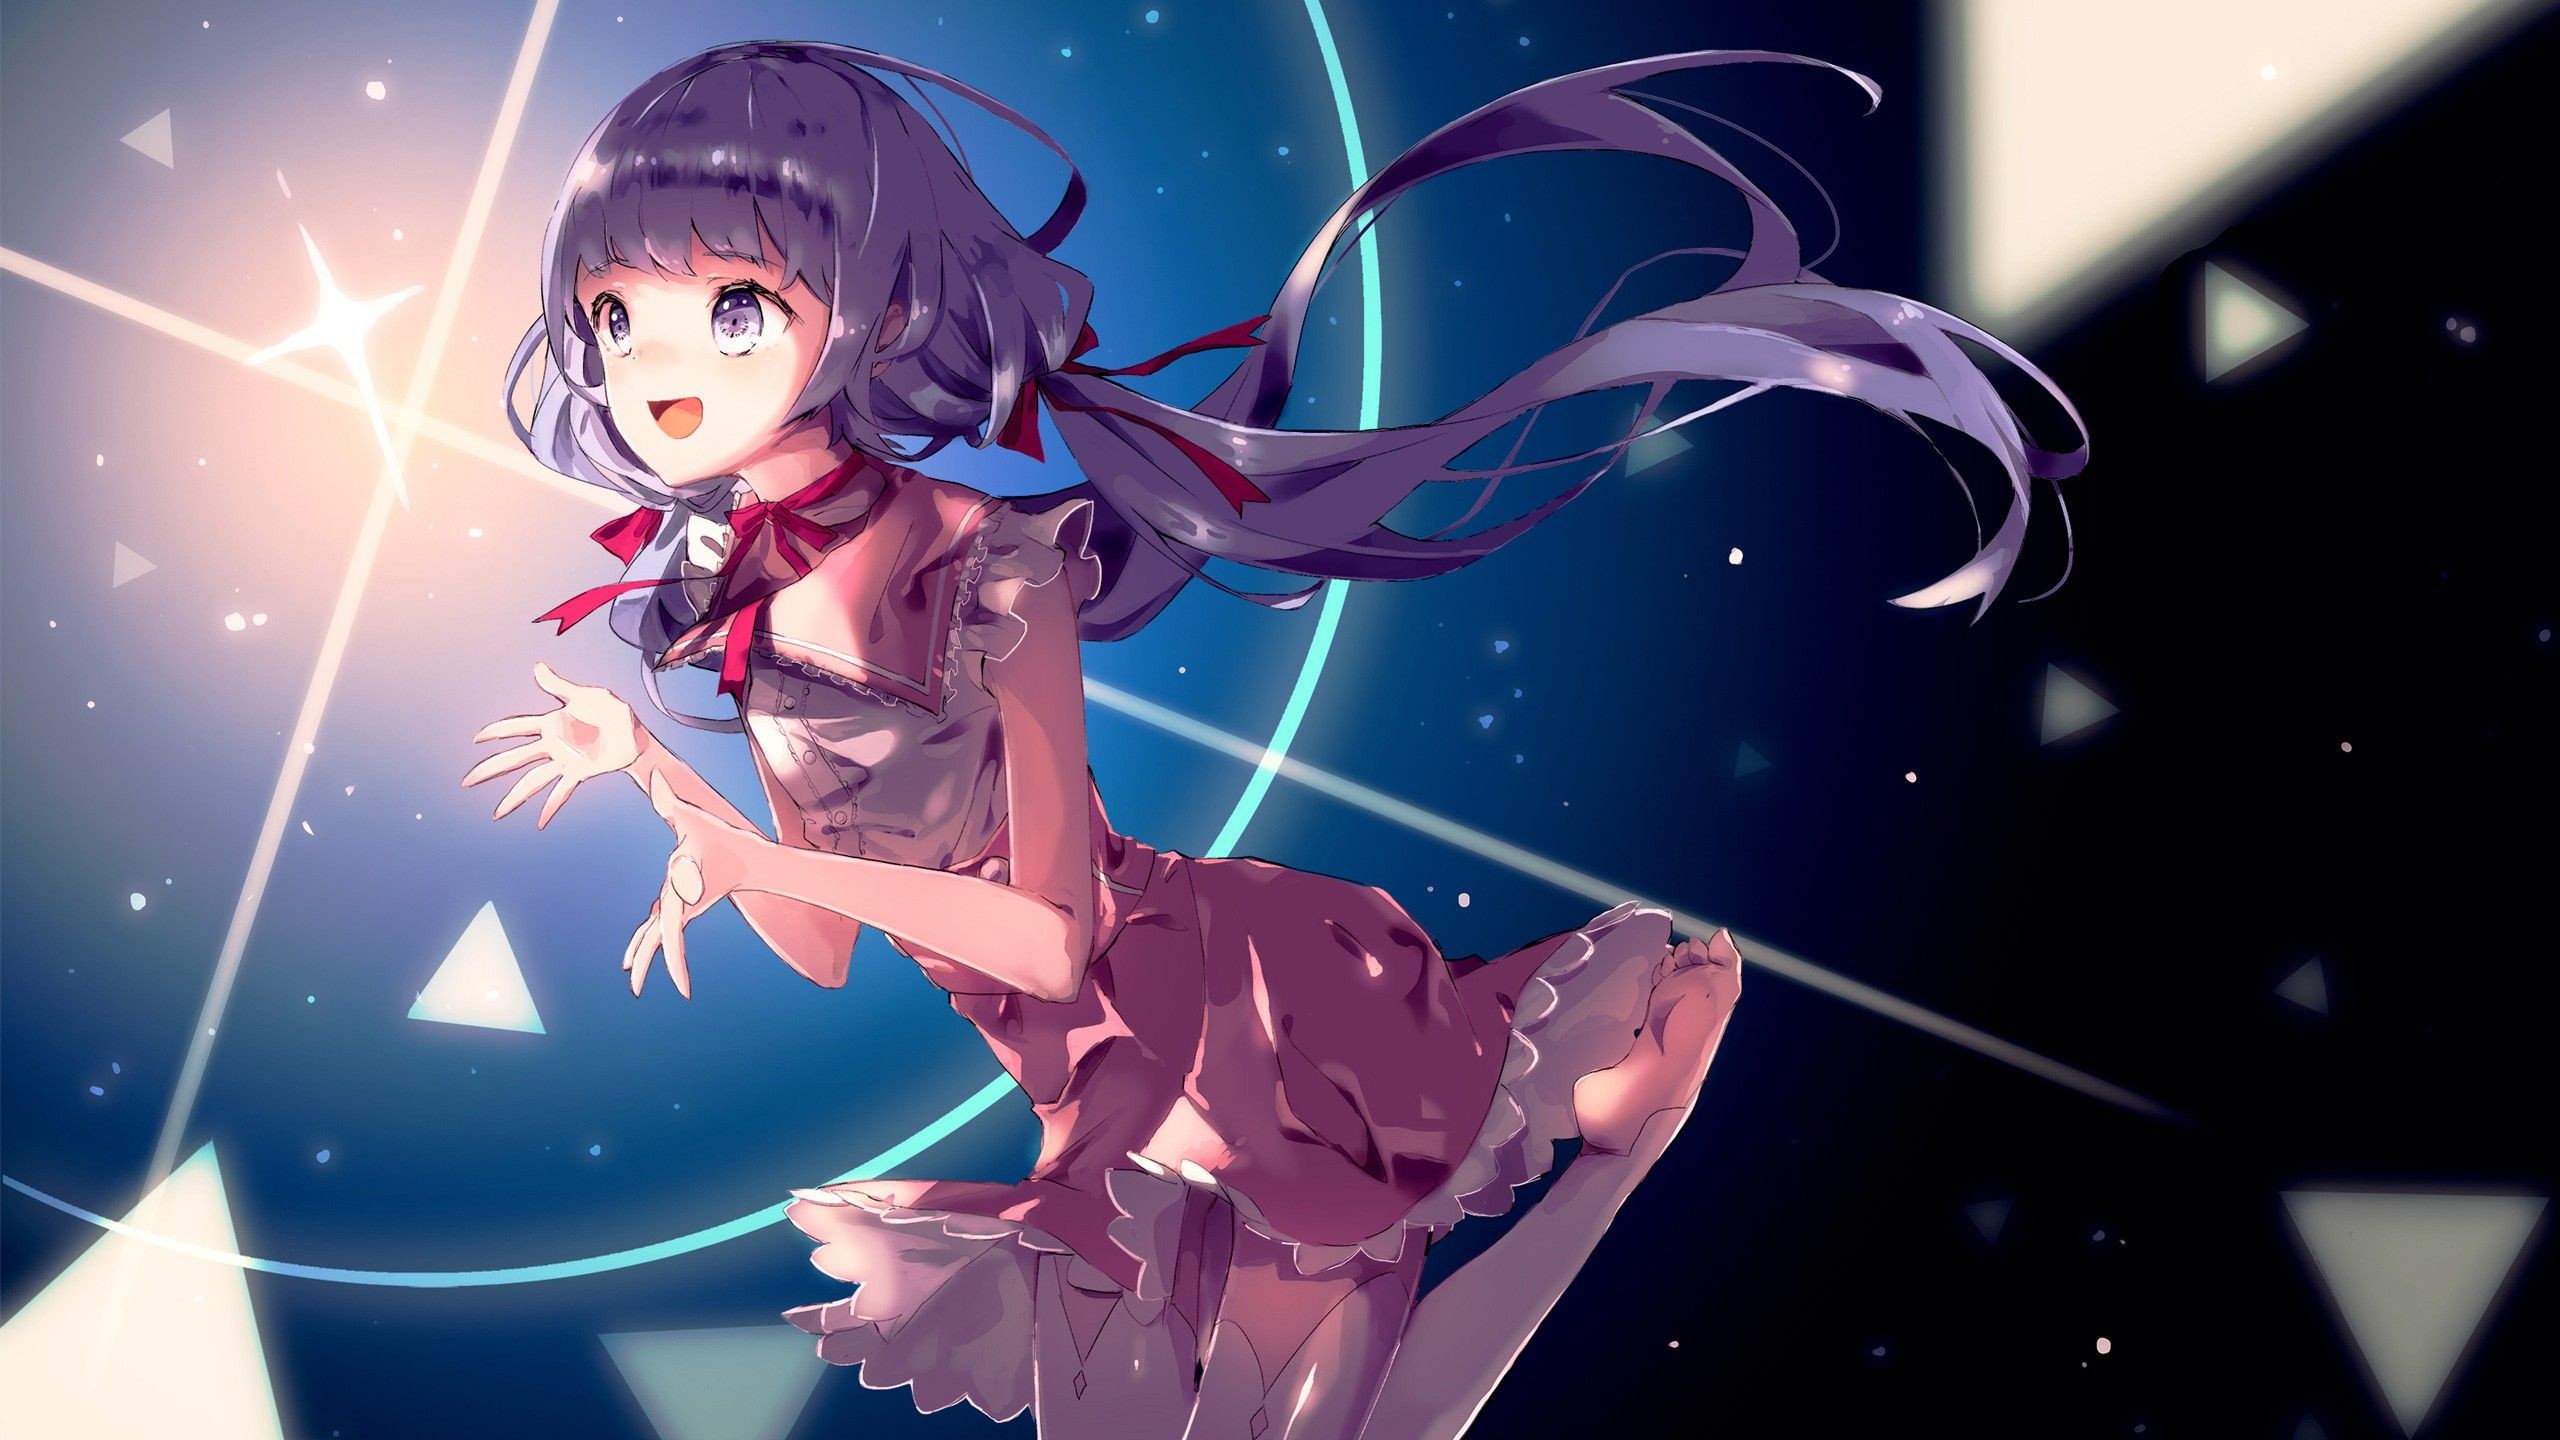 Anime HD Wallpaper 2560x1440 (83+ images)